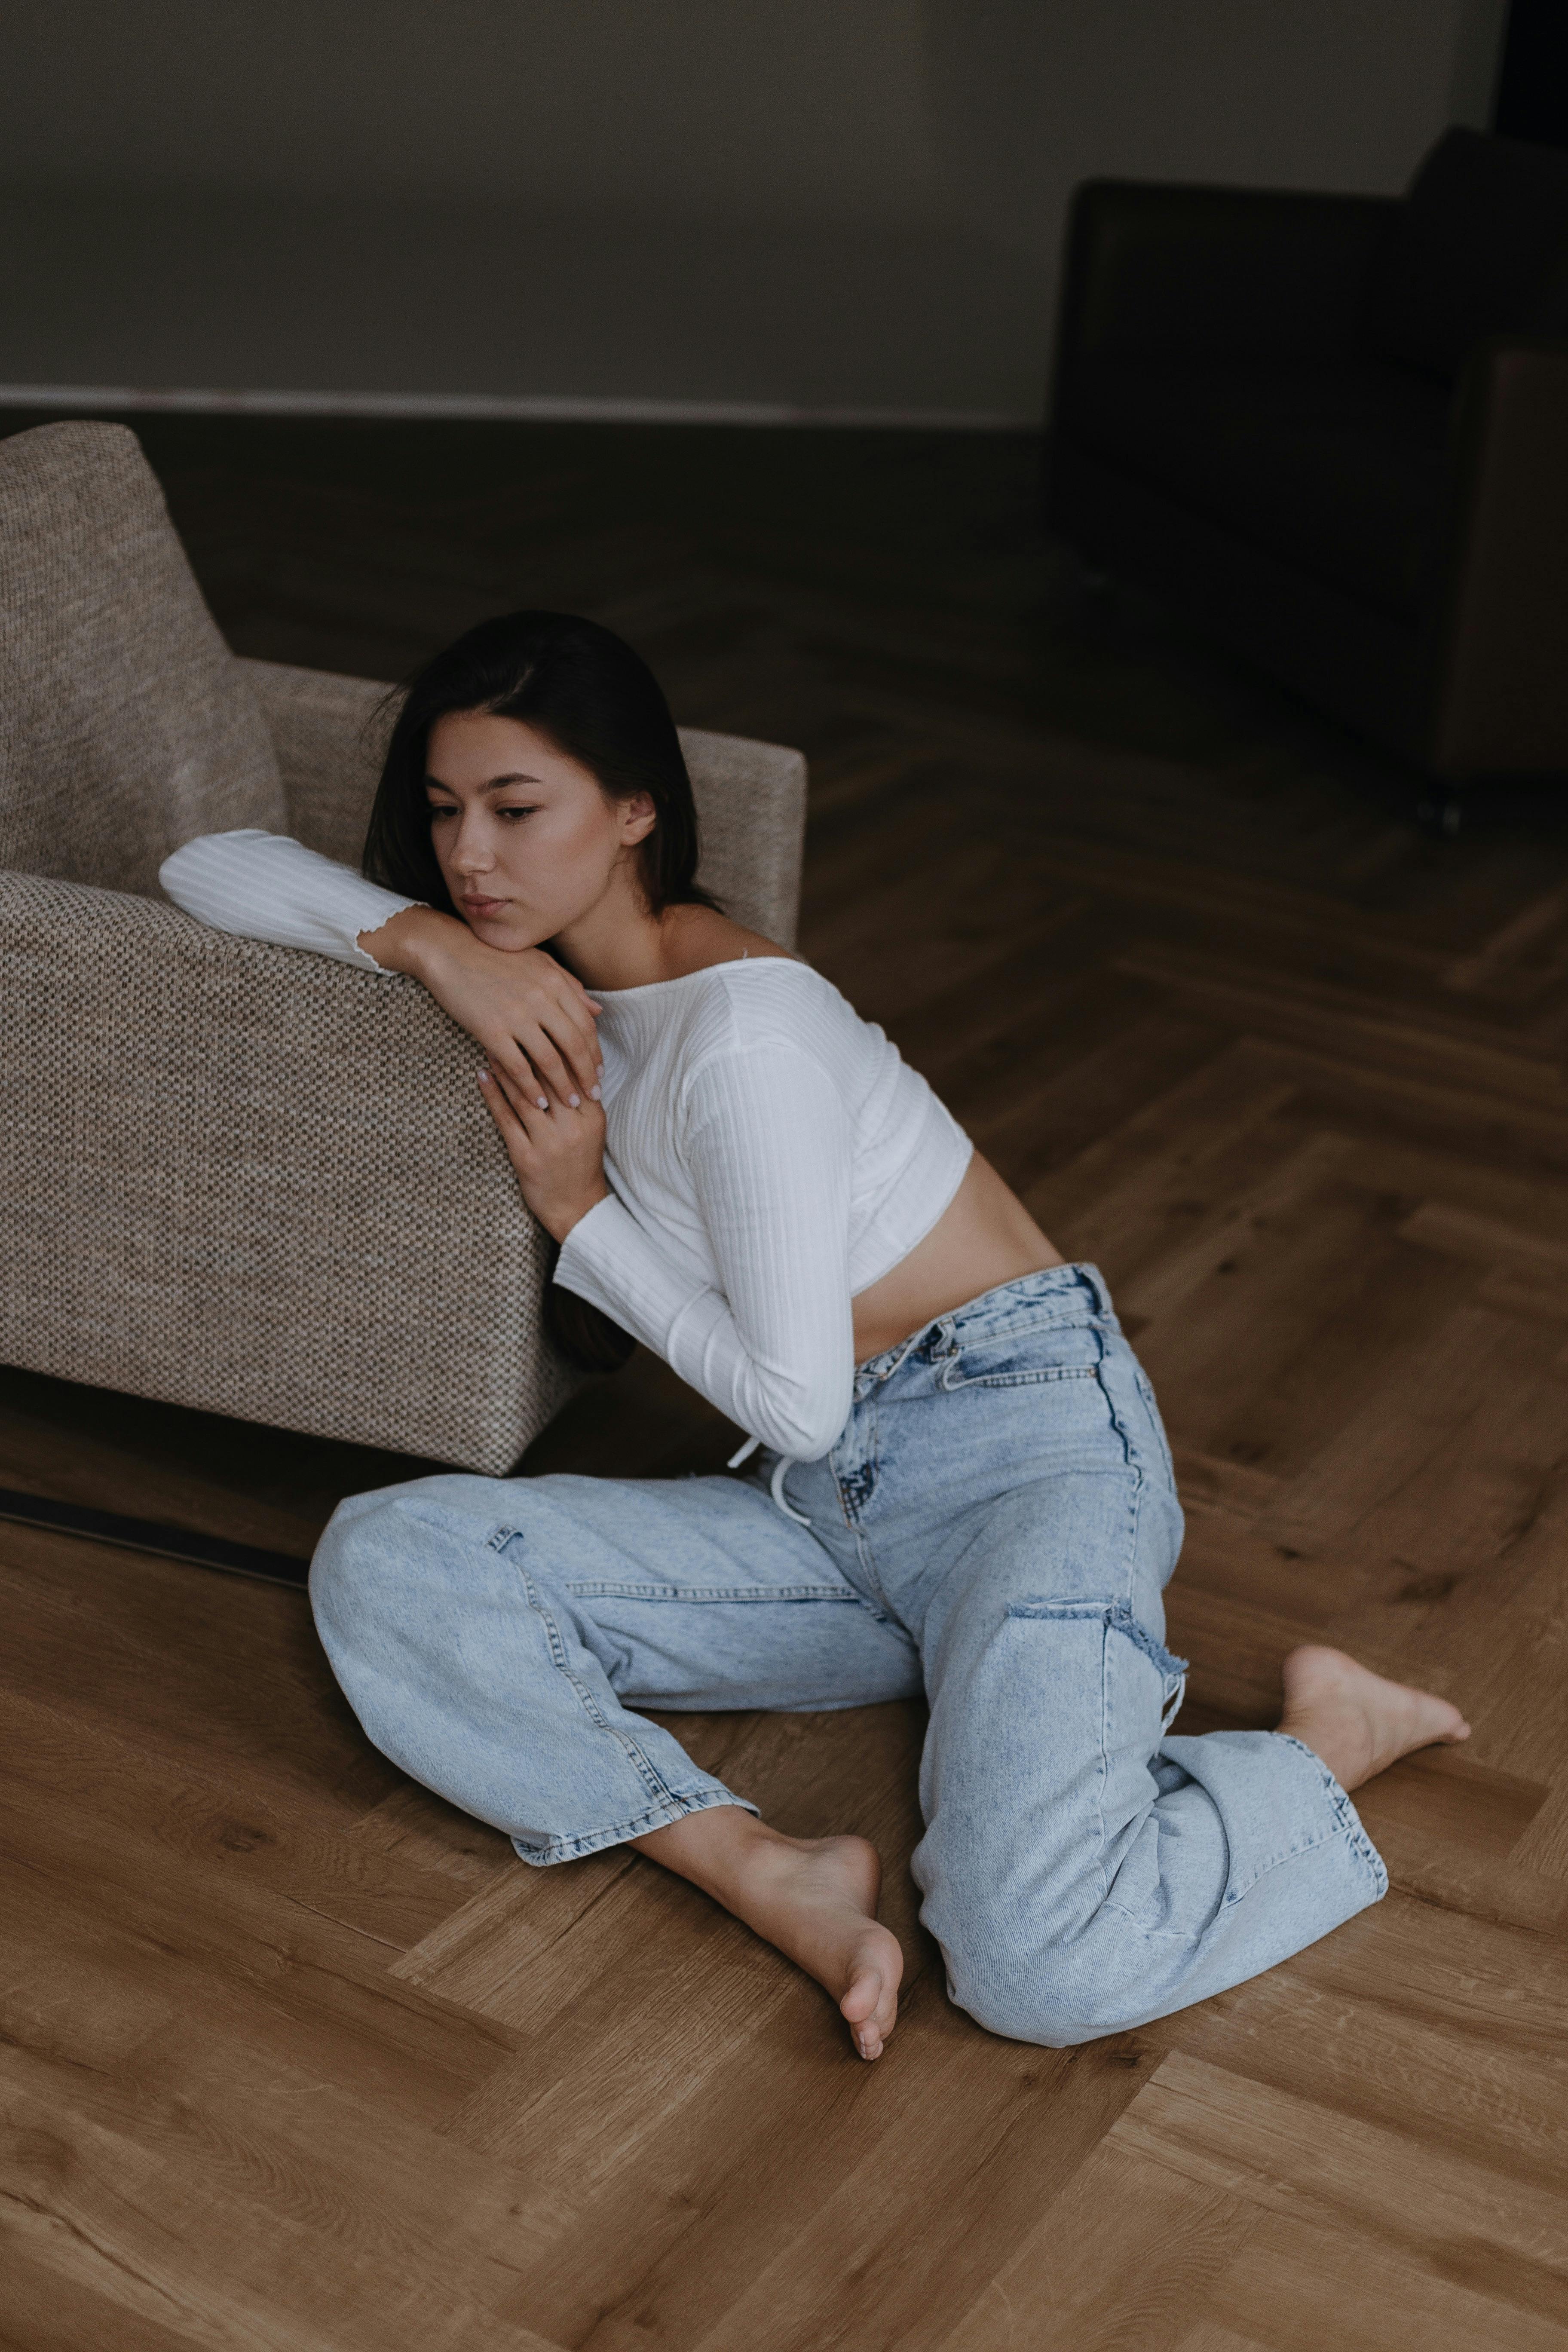 Barefoot Brunette Woman in White Knit Top and Blue Jeans Sitting